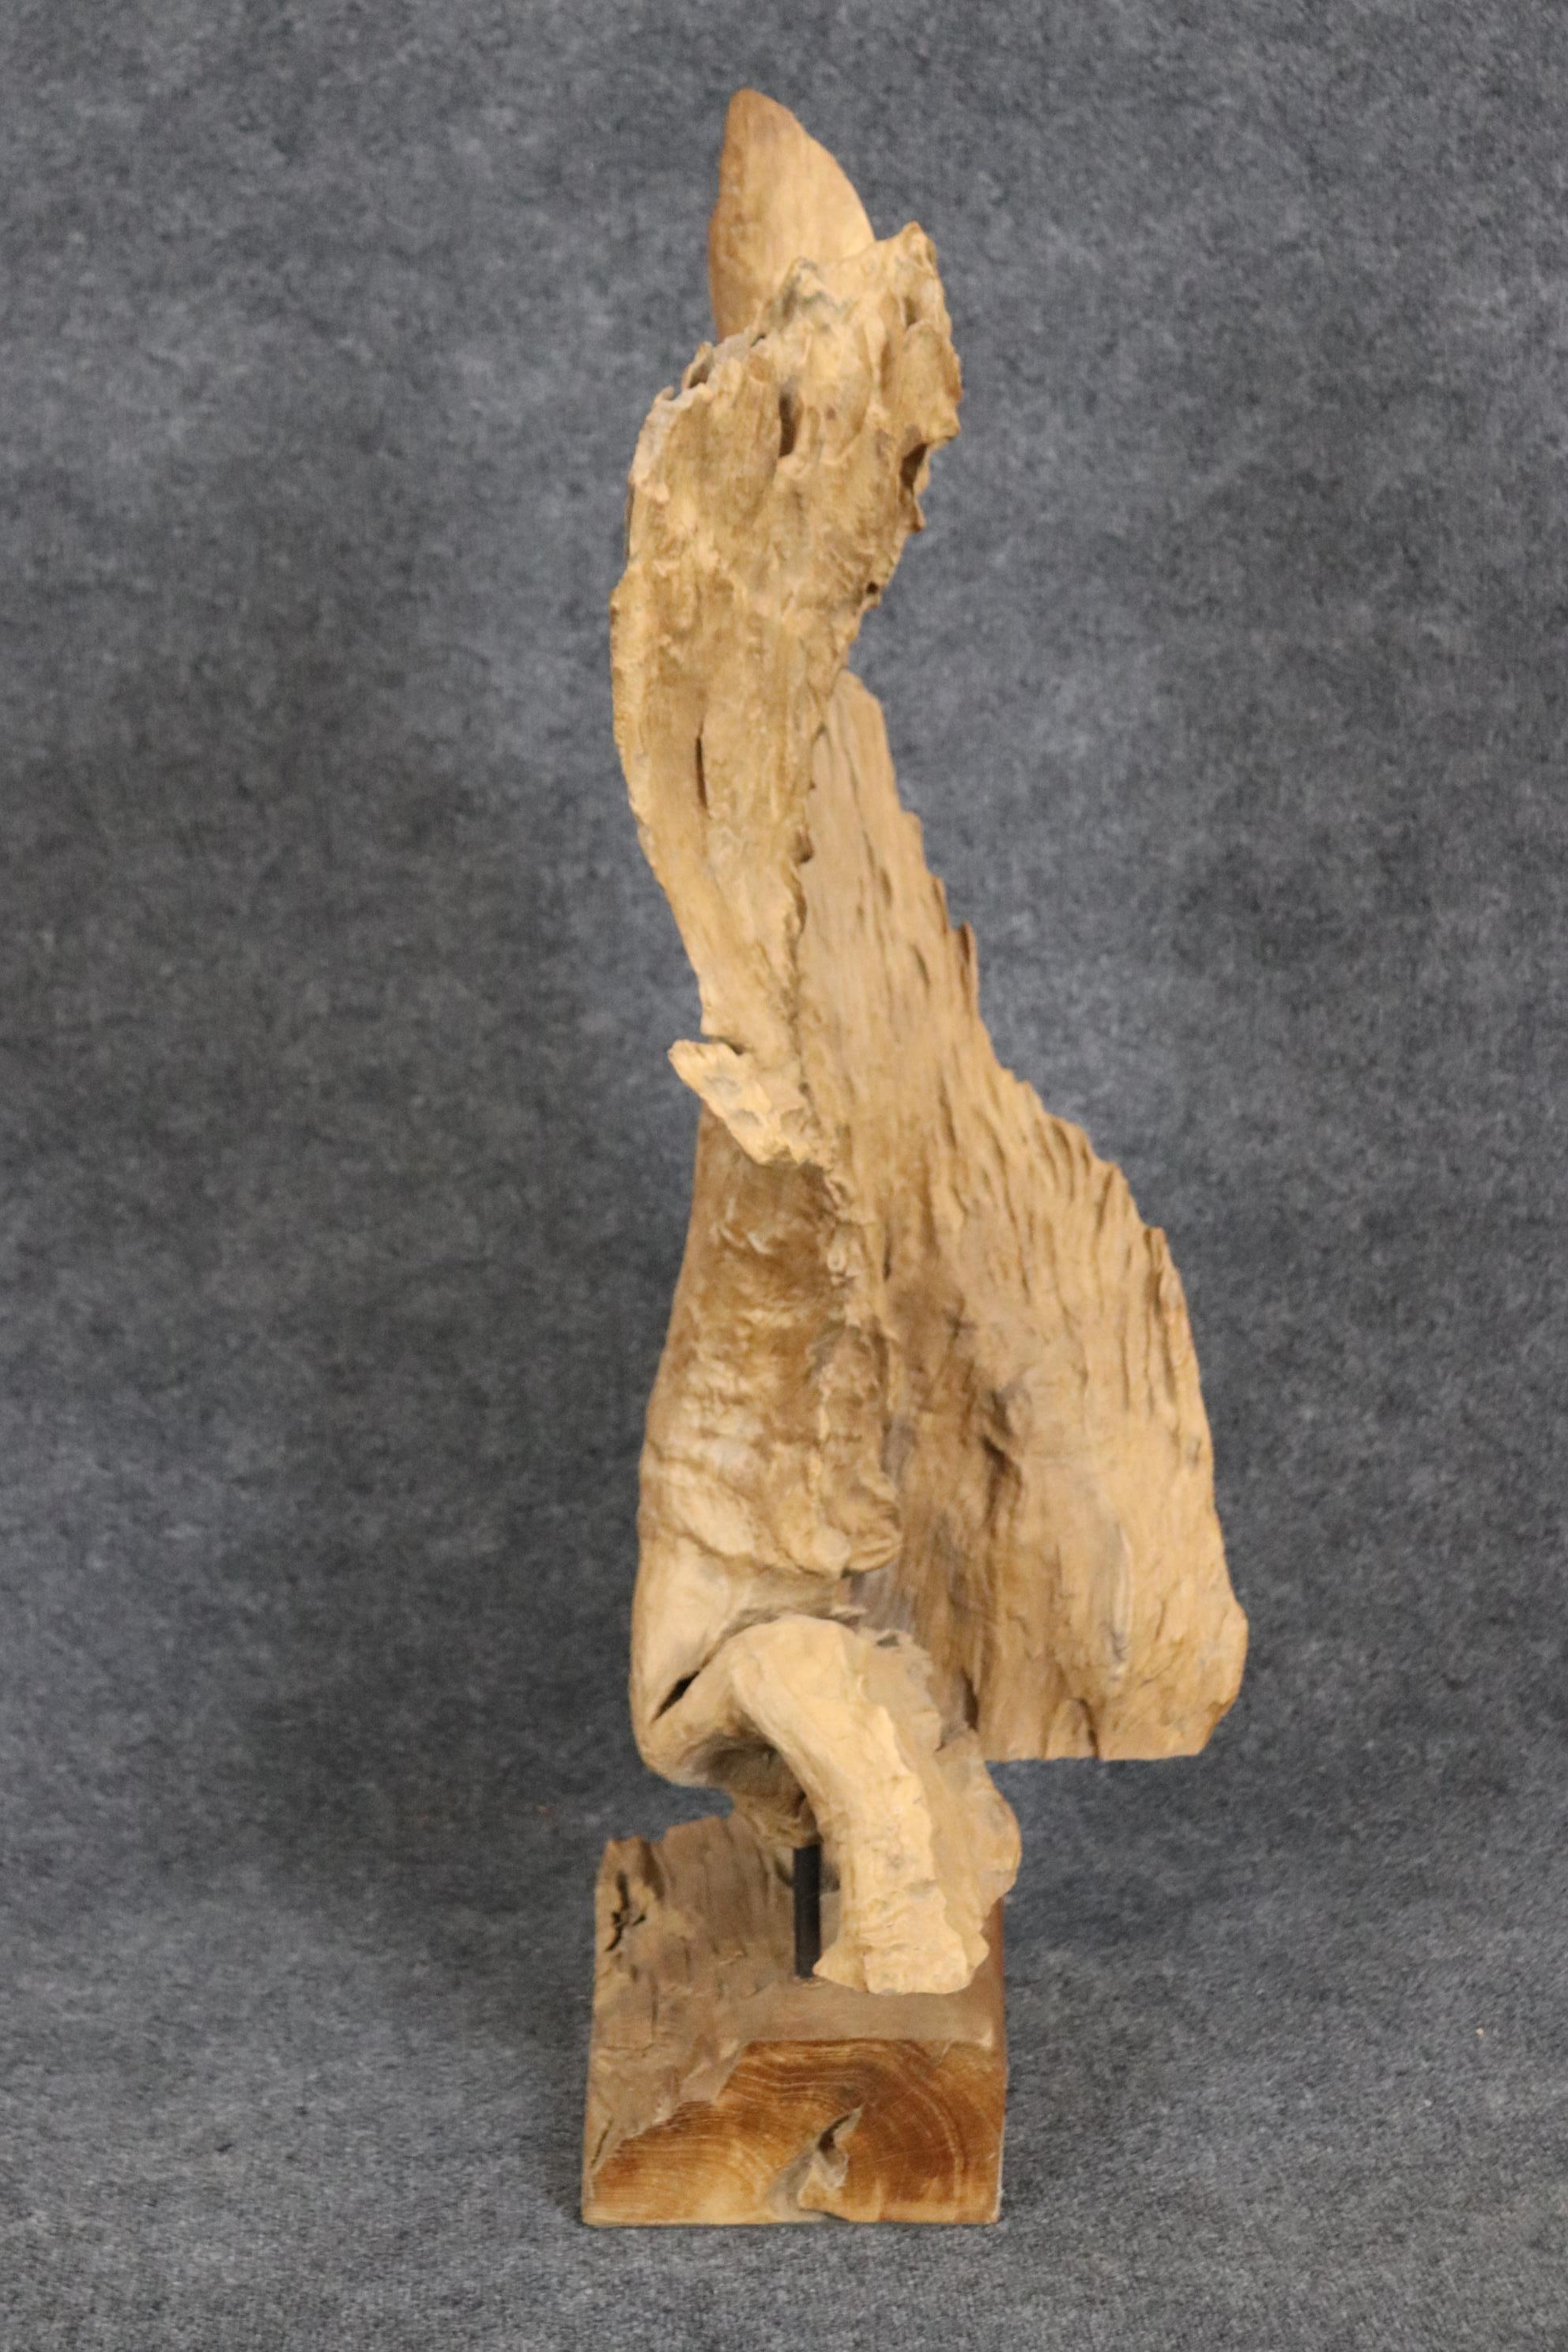 This is a gorgeous natural specimen of driftwood professionally turned into a modern sculpture. This is a large and very decorative piece of natural driftwood and will look great on a desk or on en etagere or bookshelf. Measures 41.5 tall x 18.75